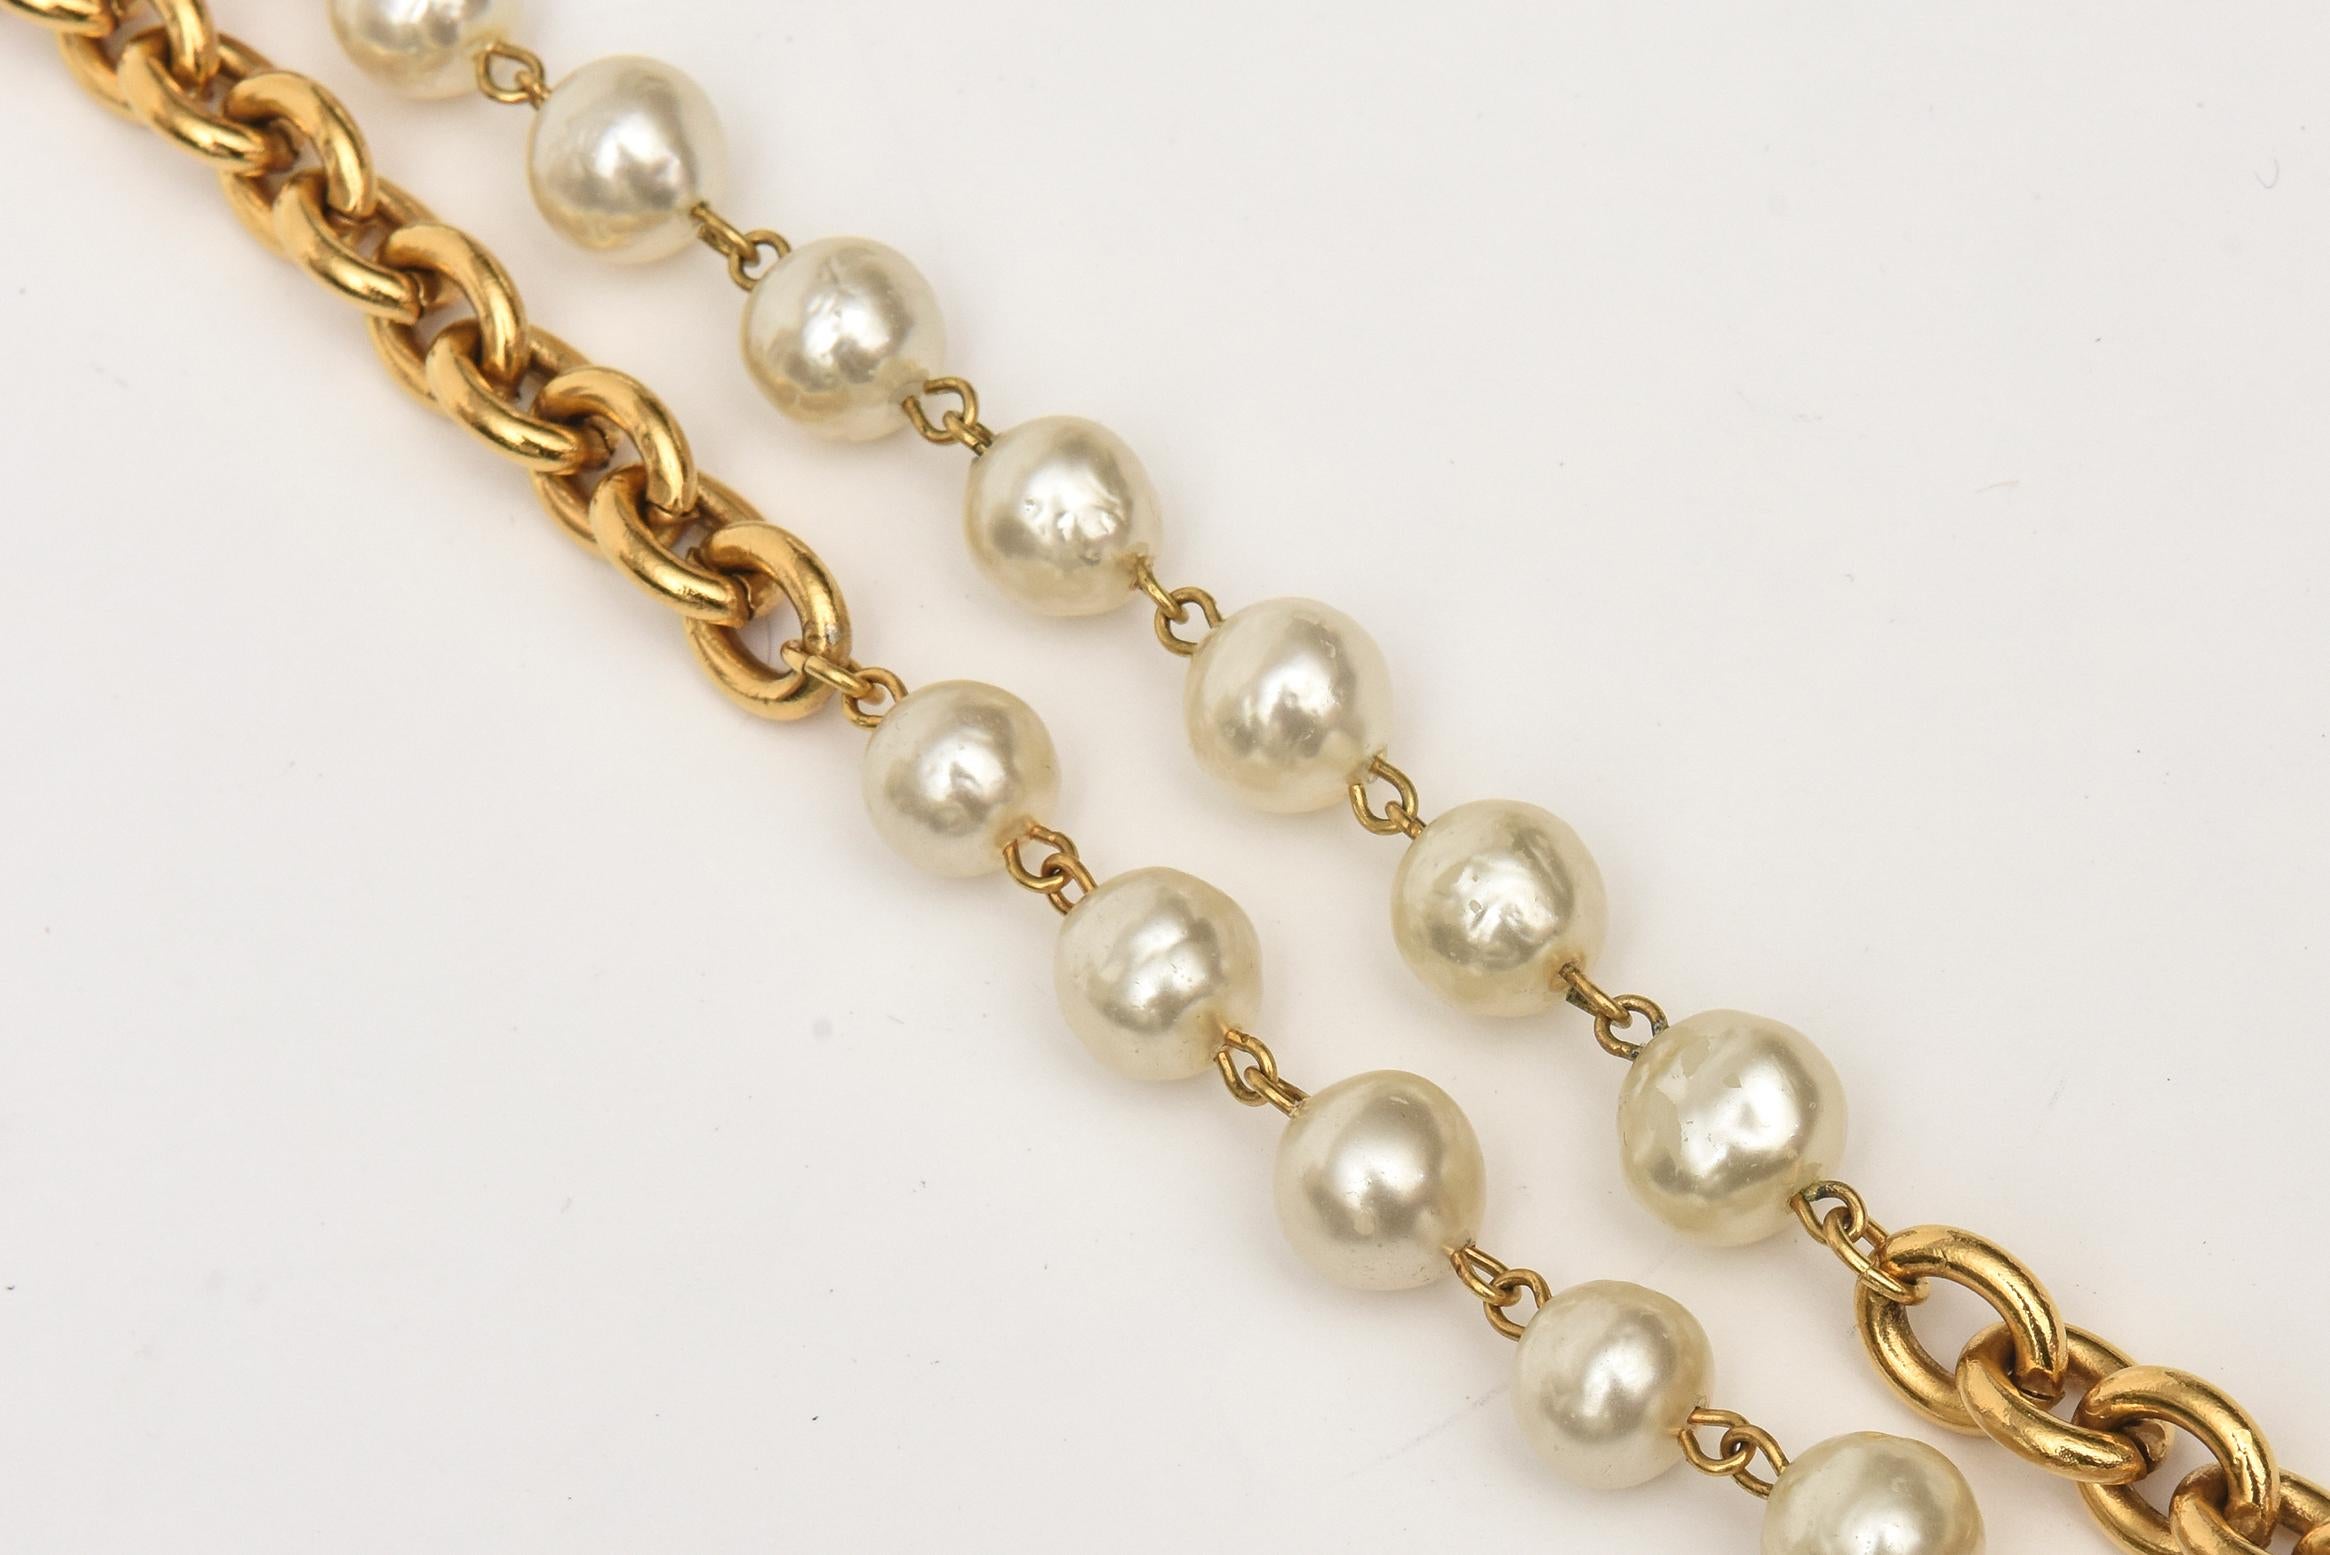 This classic Chanel double strand is oval link chain with interspersed faux Chanel pearls. The circa is 1990. It is very long and can be doubled up or tripled up. Very chic and always in style and season. This is again classic Chanel. Sometimes